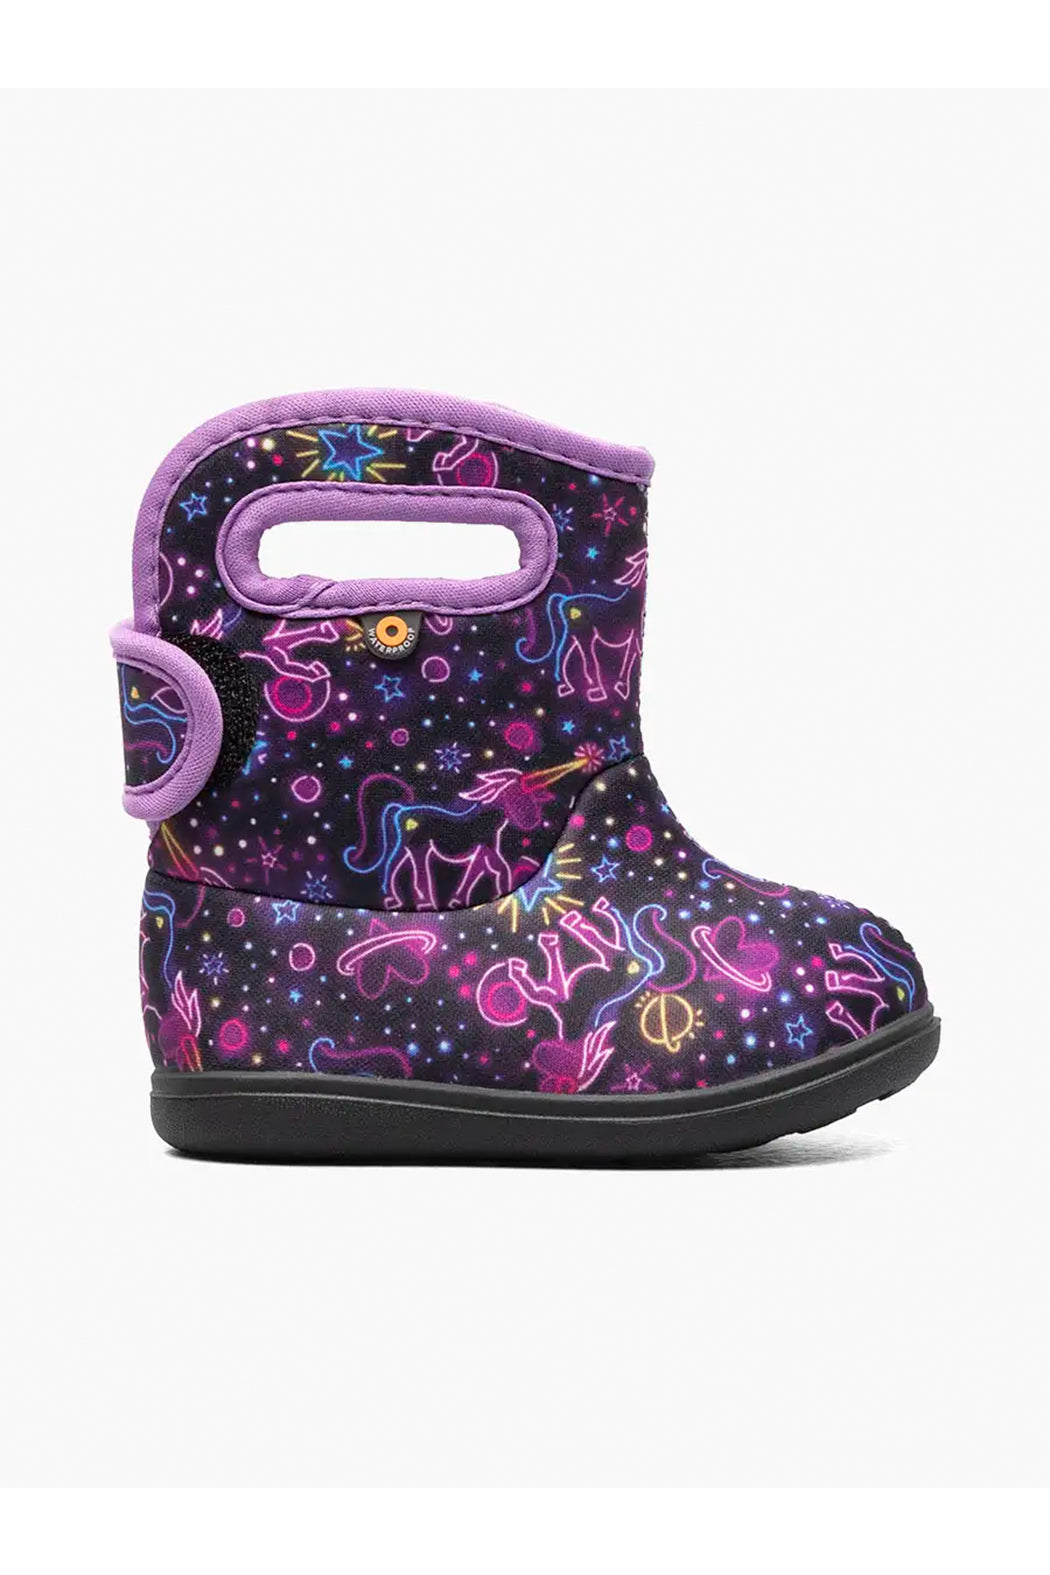 BOGS Baby Bogs Unicorn Waterproof Insulated Boots